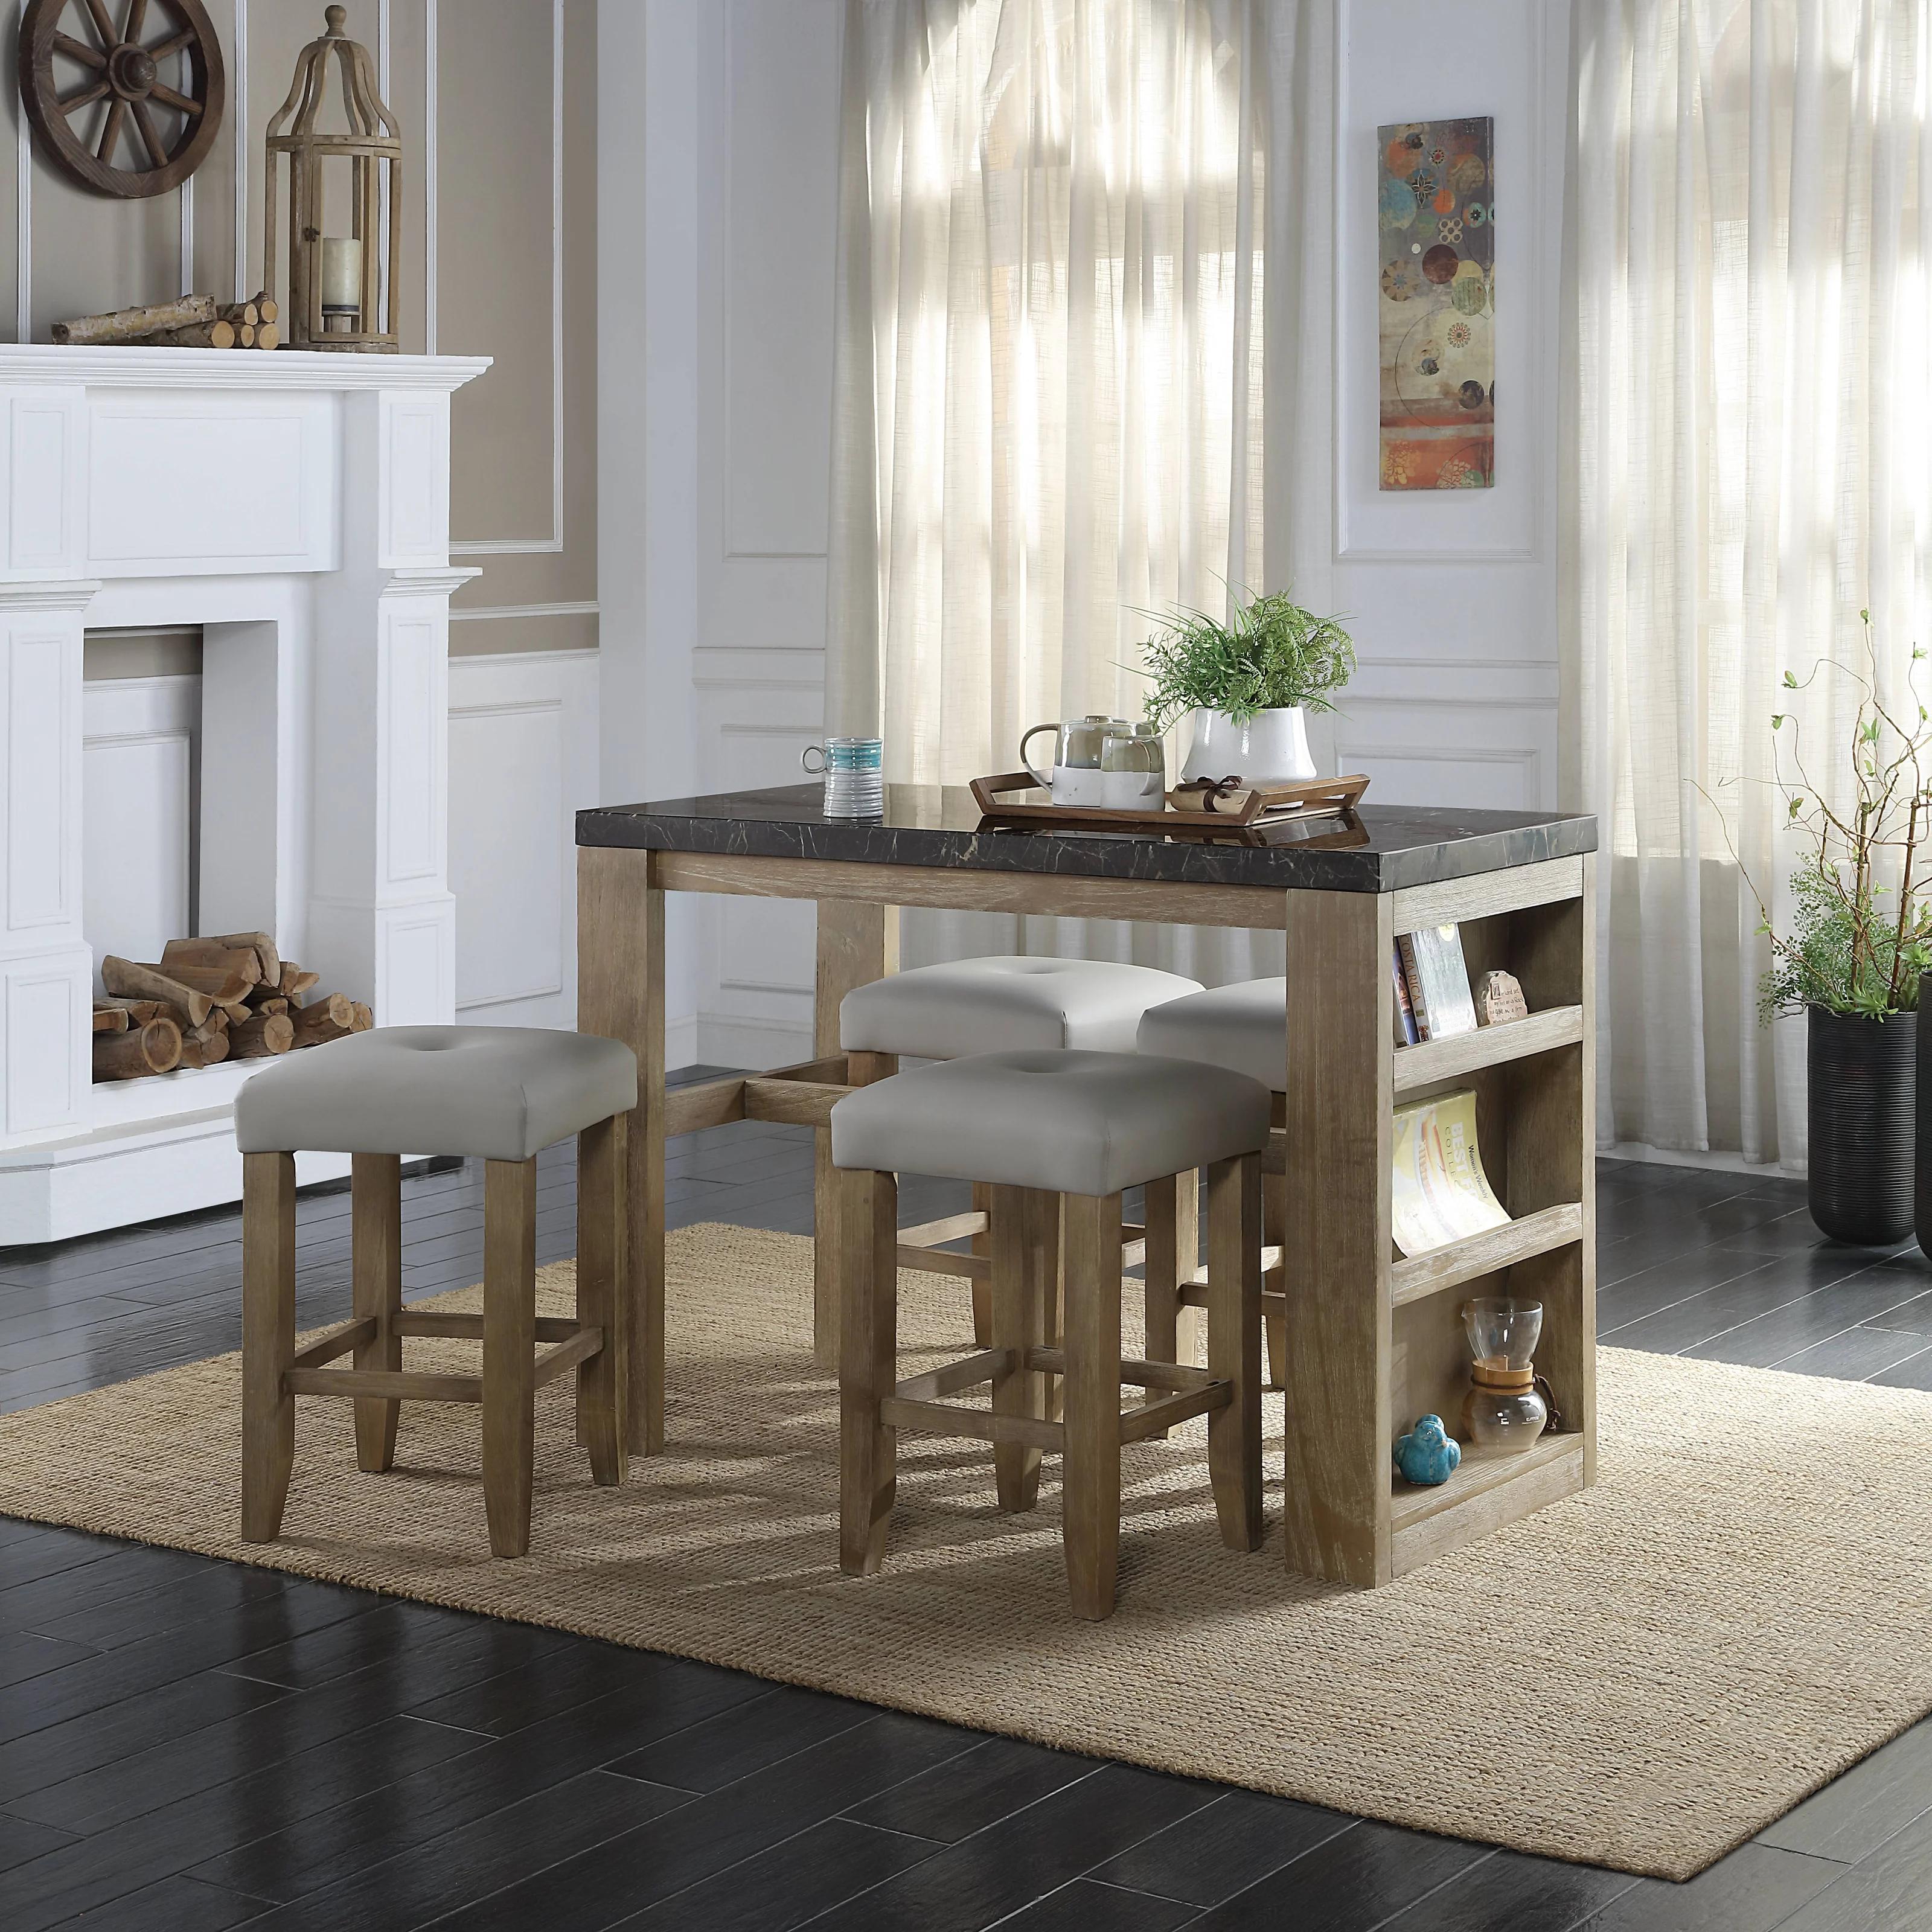 Transitional Counter Height Set Charnell DN00551-5pcs in Oak 